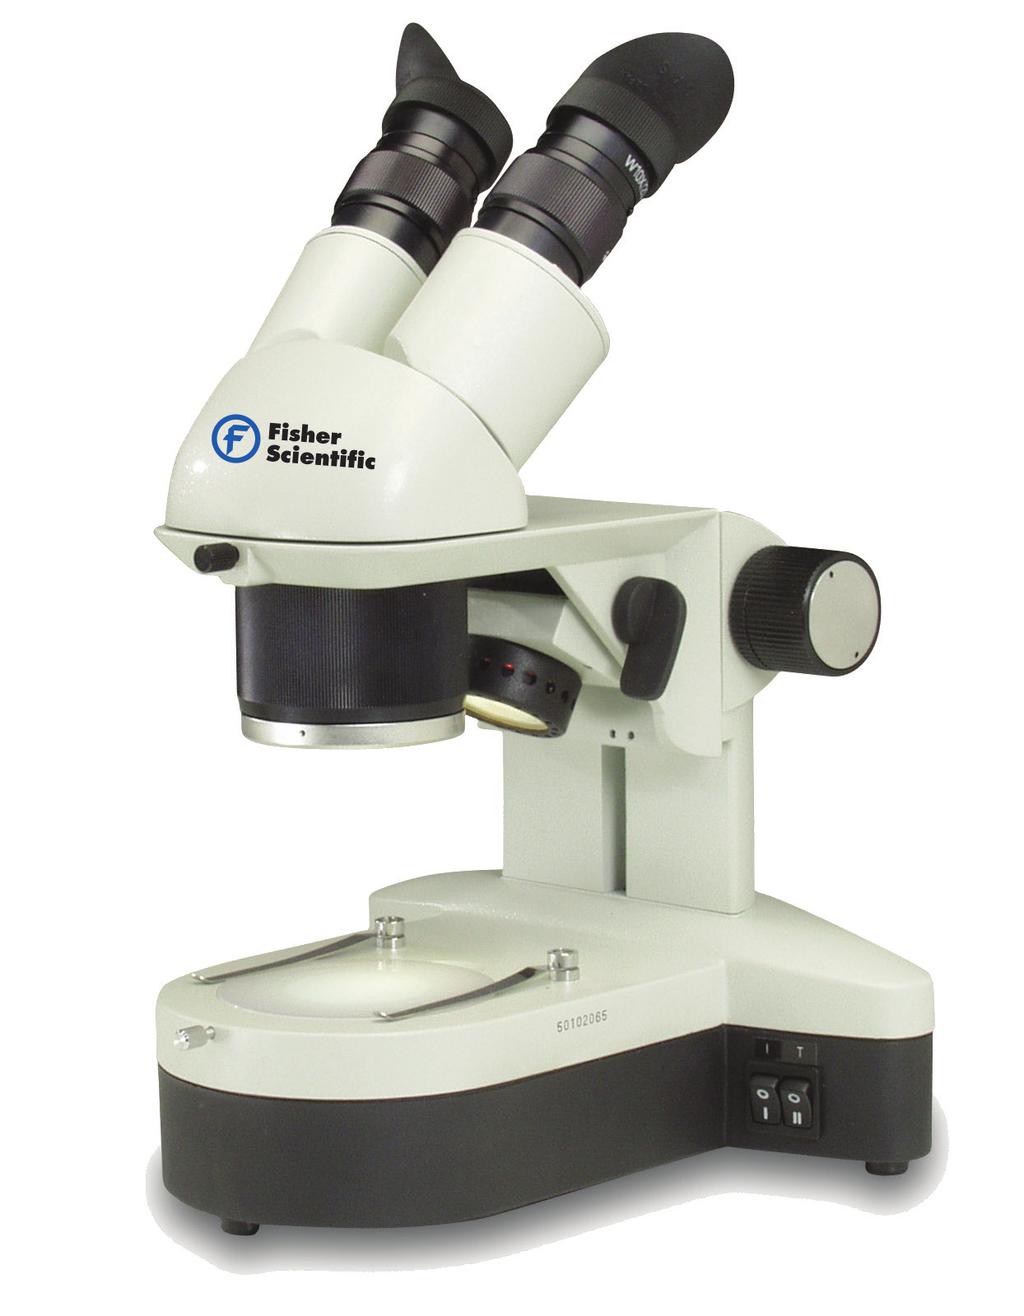 Stereo Zoom Microscope (1X-3X) The Stereo Zoom Microscope is an exceptional 1:3 stereo zoom microscope.